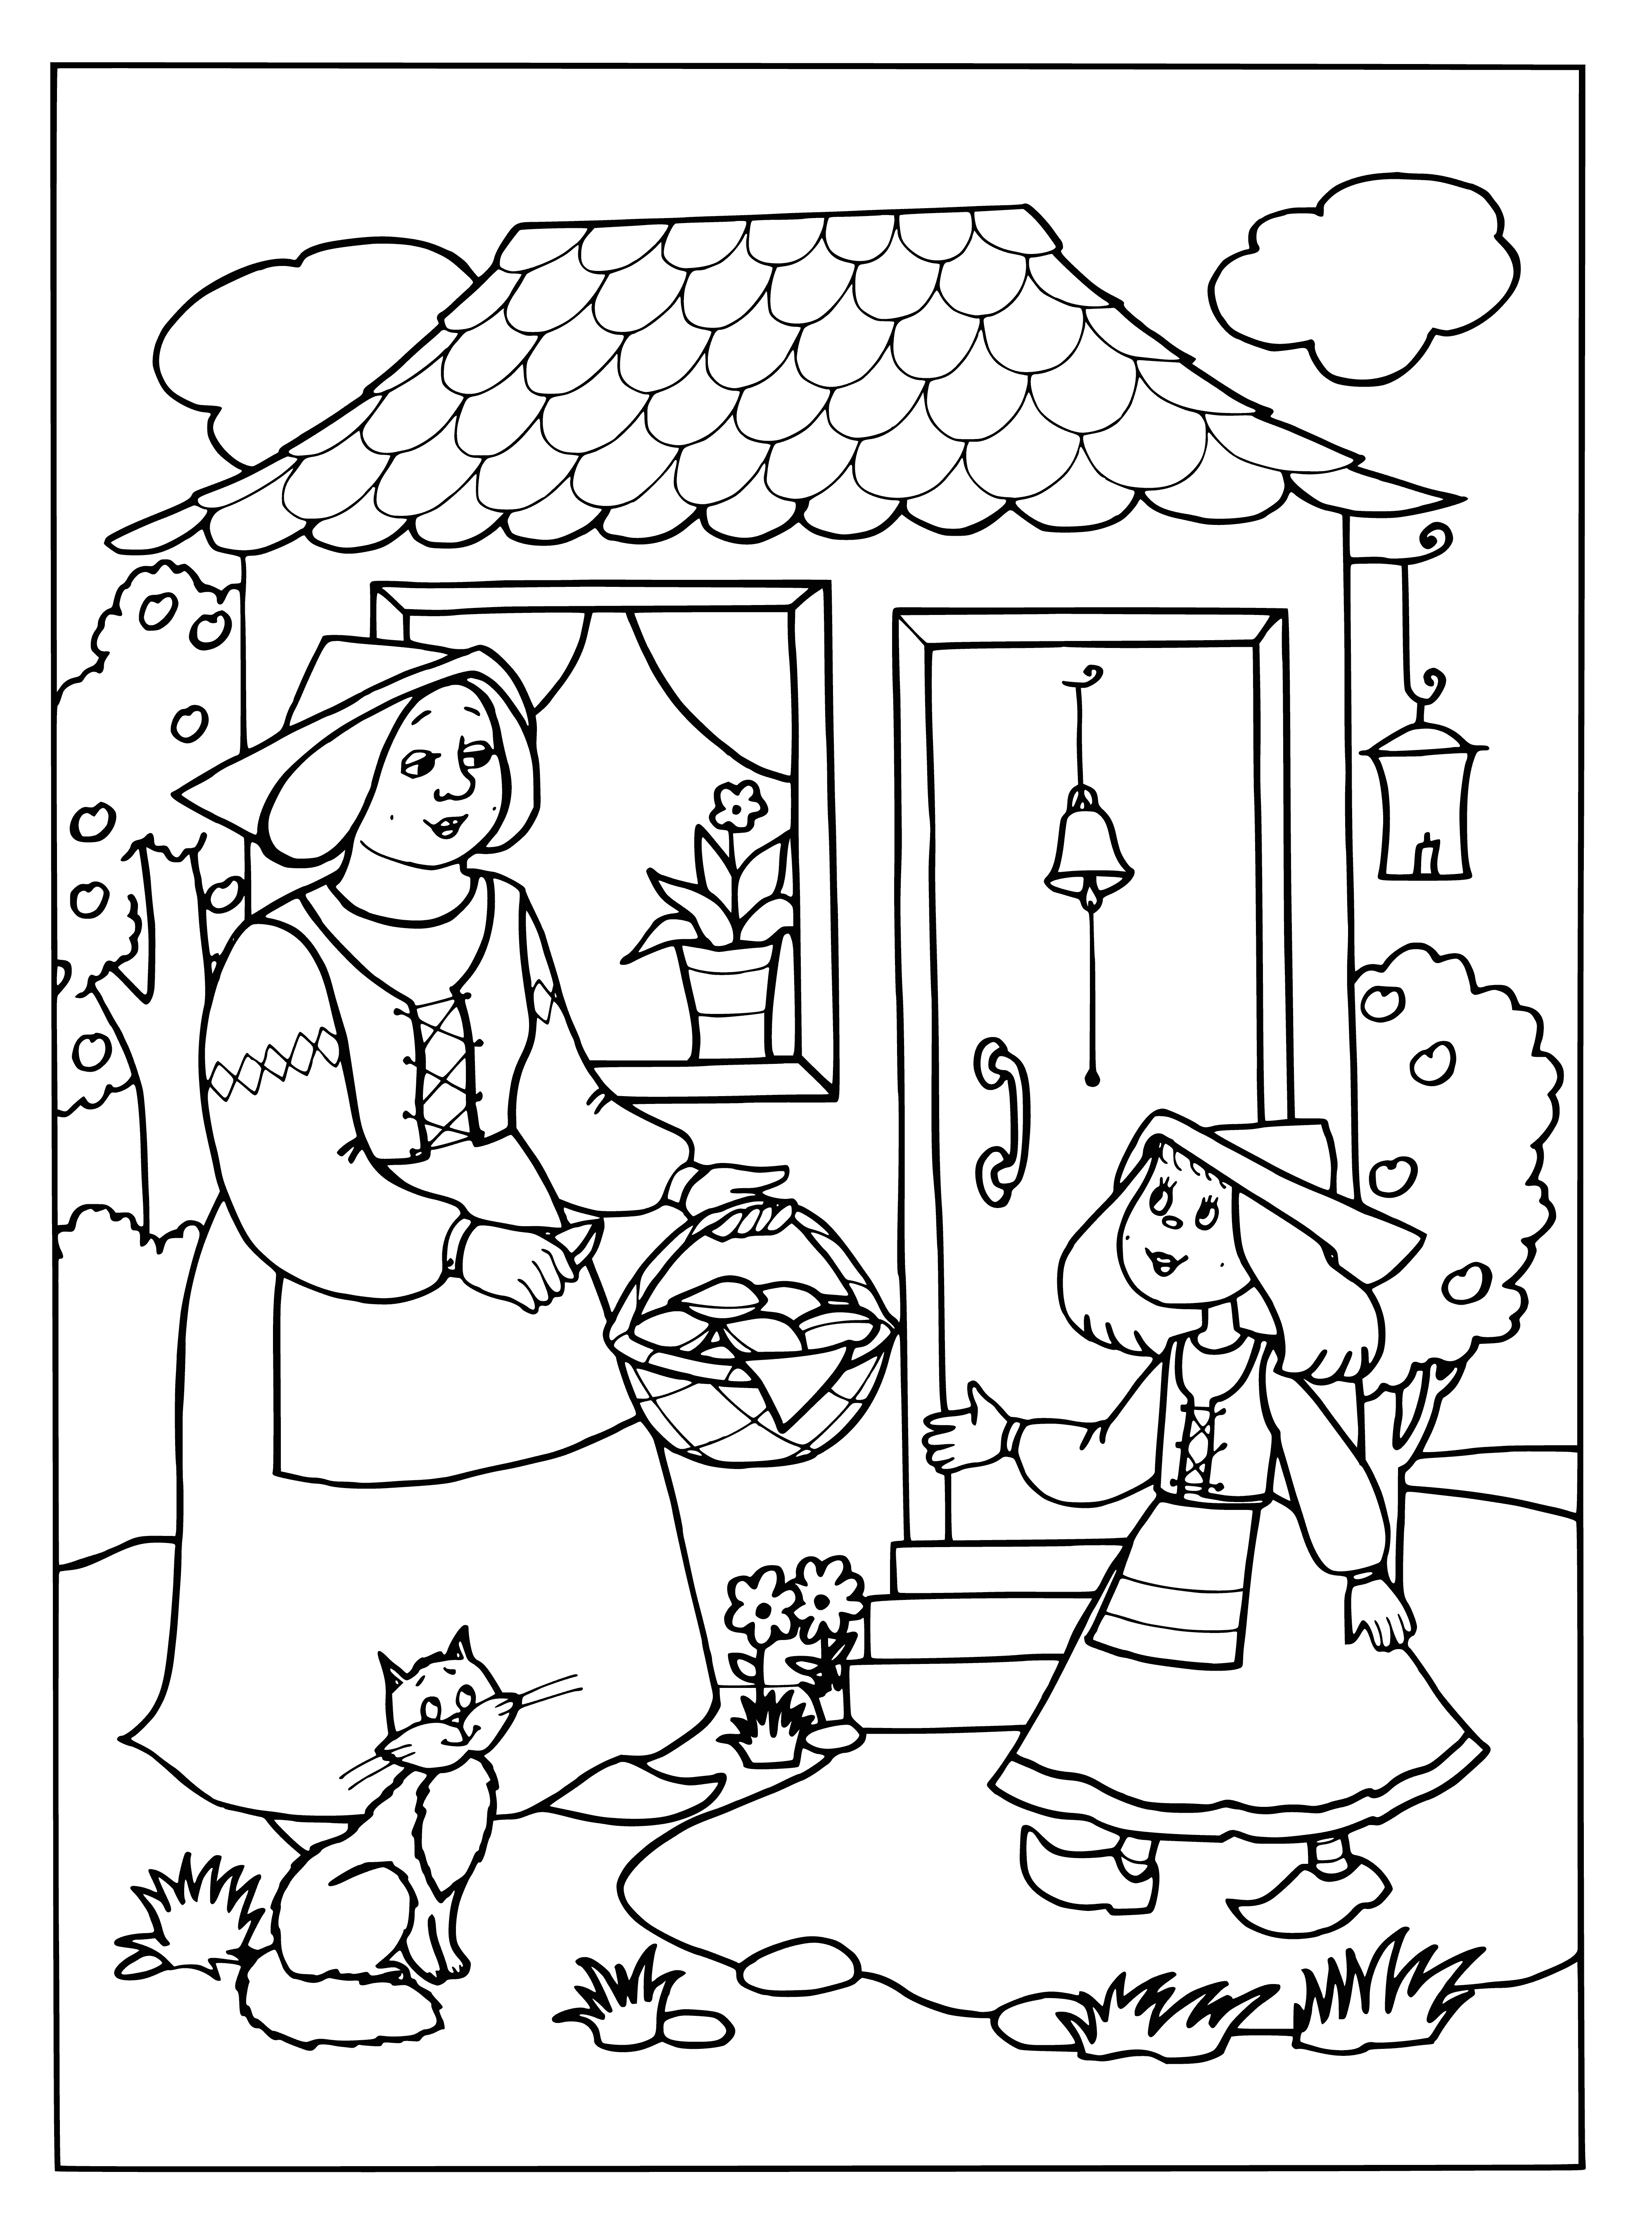 coloring page: Little girl excitedly carries pies to Grandma's to give her a surprise.